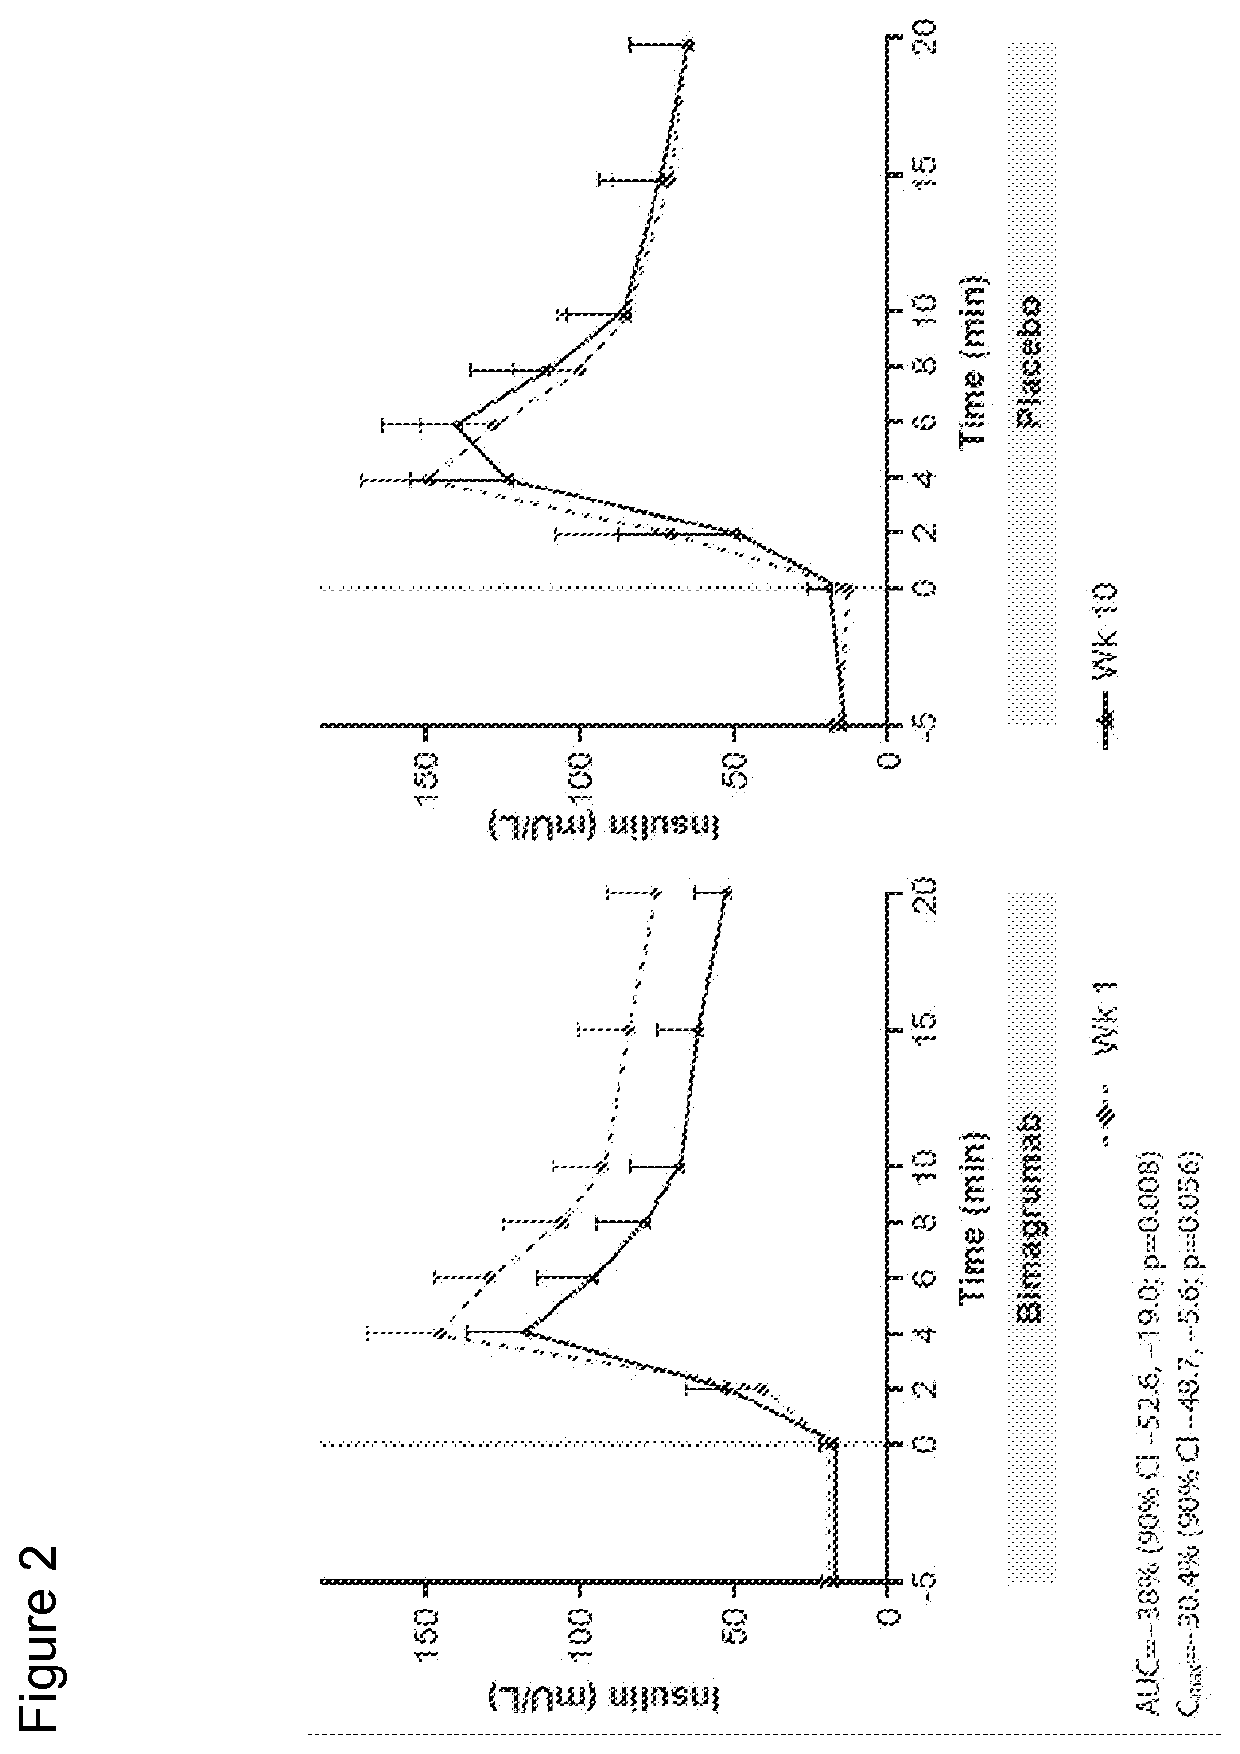 Myostatin, activin or activin receptor antagonists for use in treating obesity and related conditions